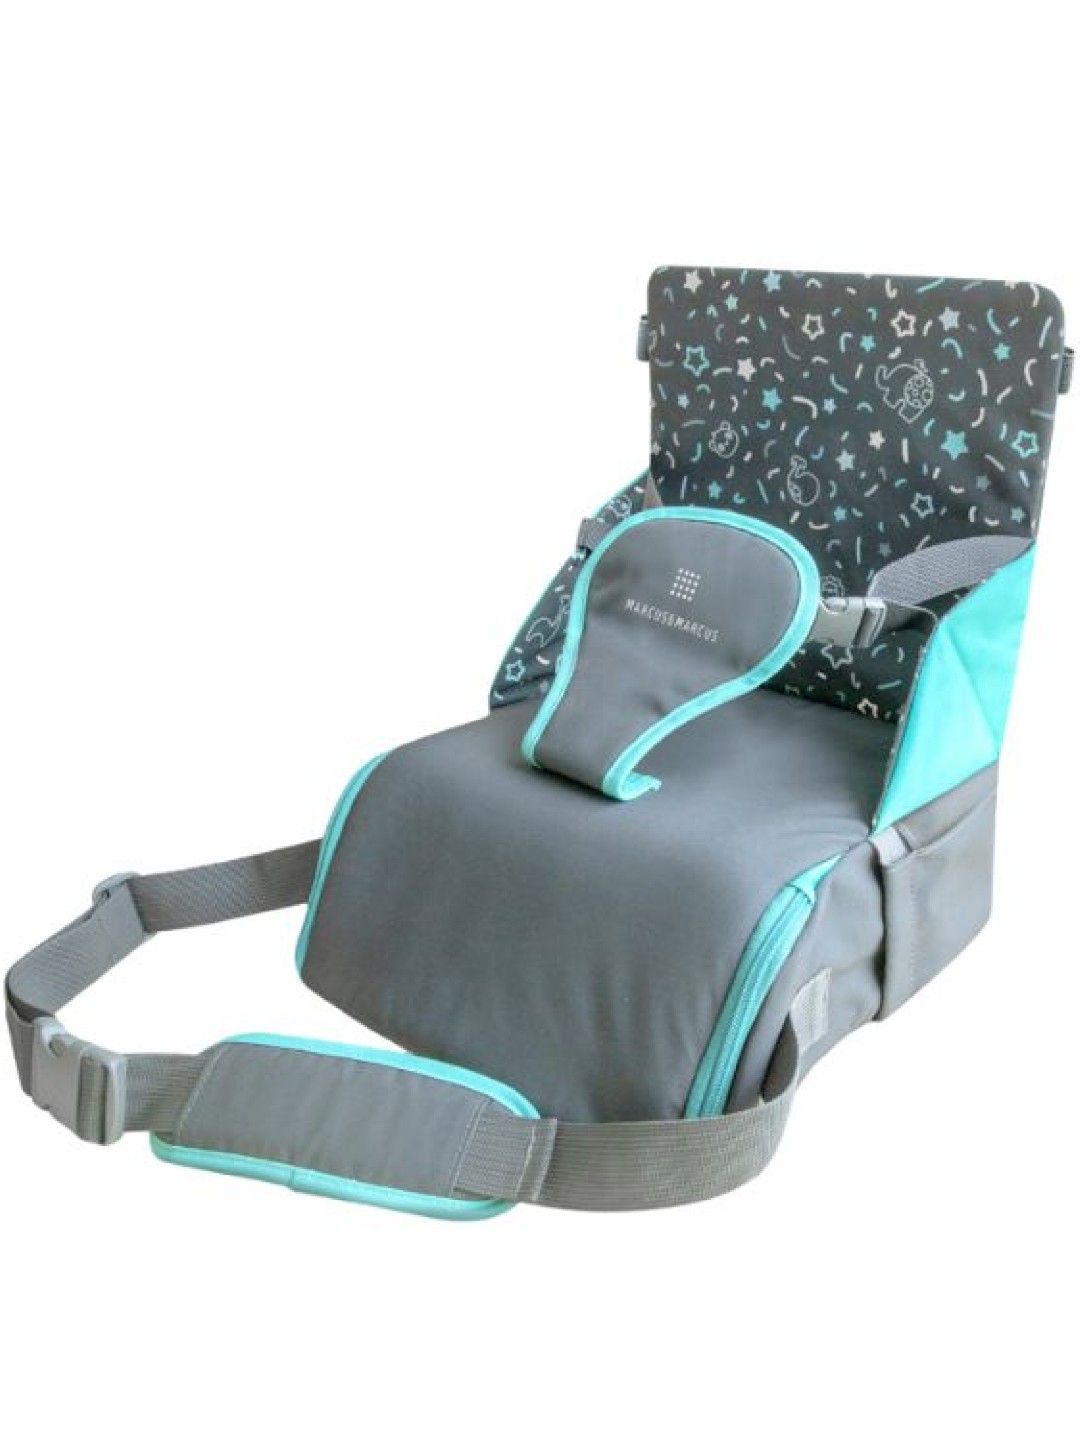 Marcus & Marcus On-the-Go Booster Seat + Diaper Bag